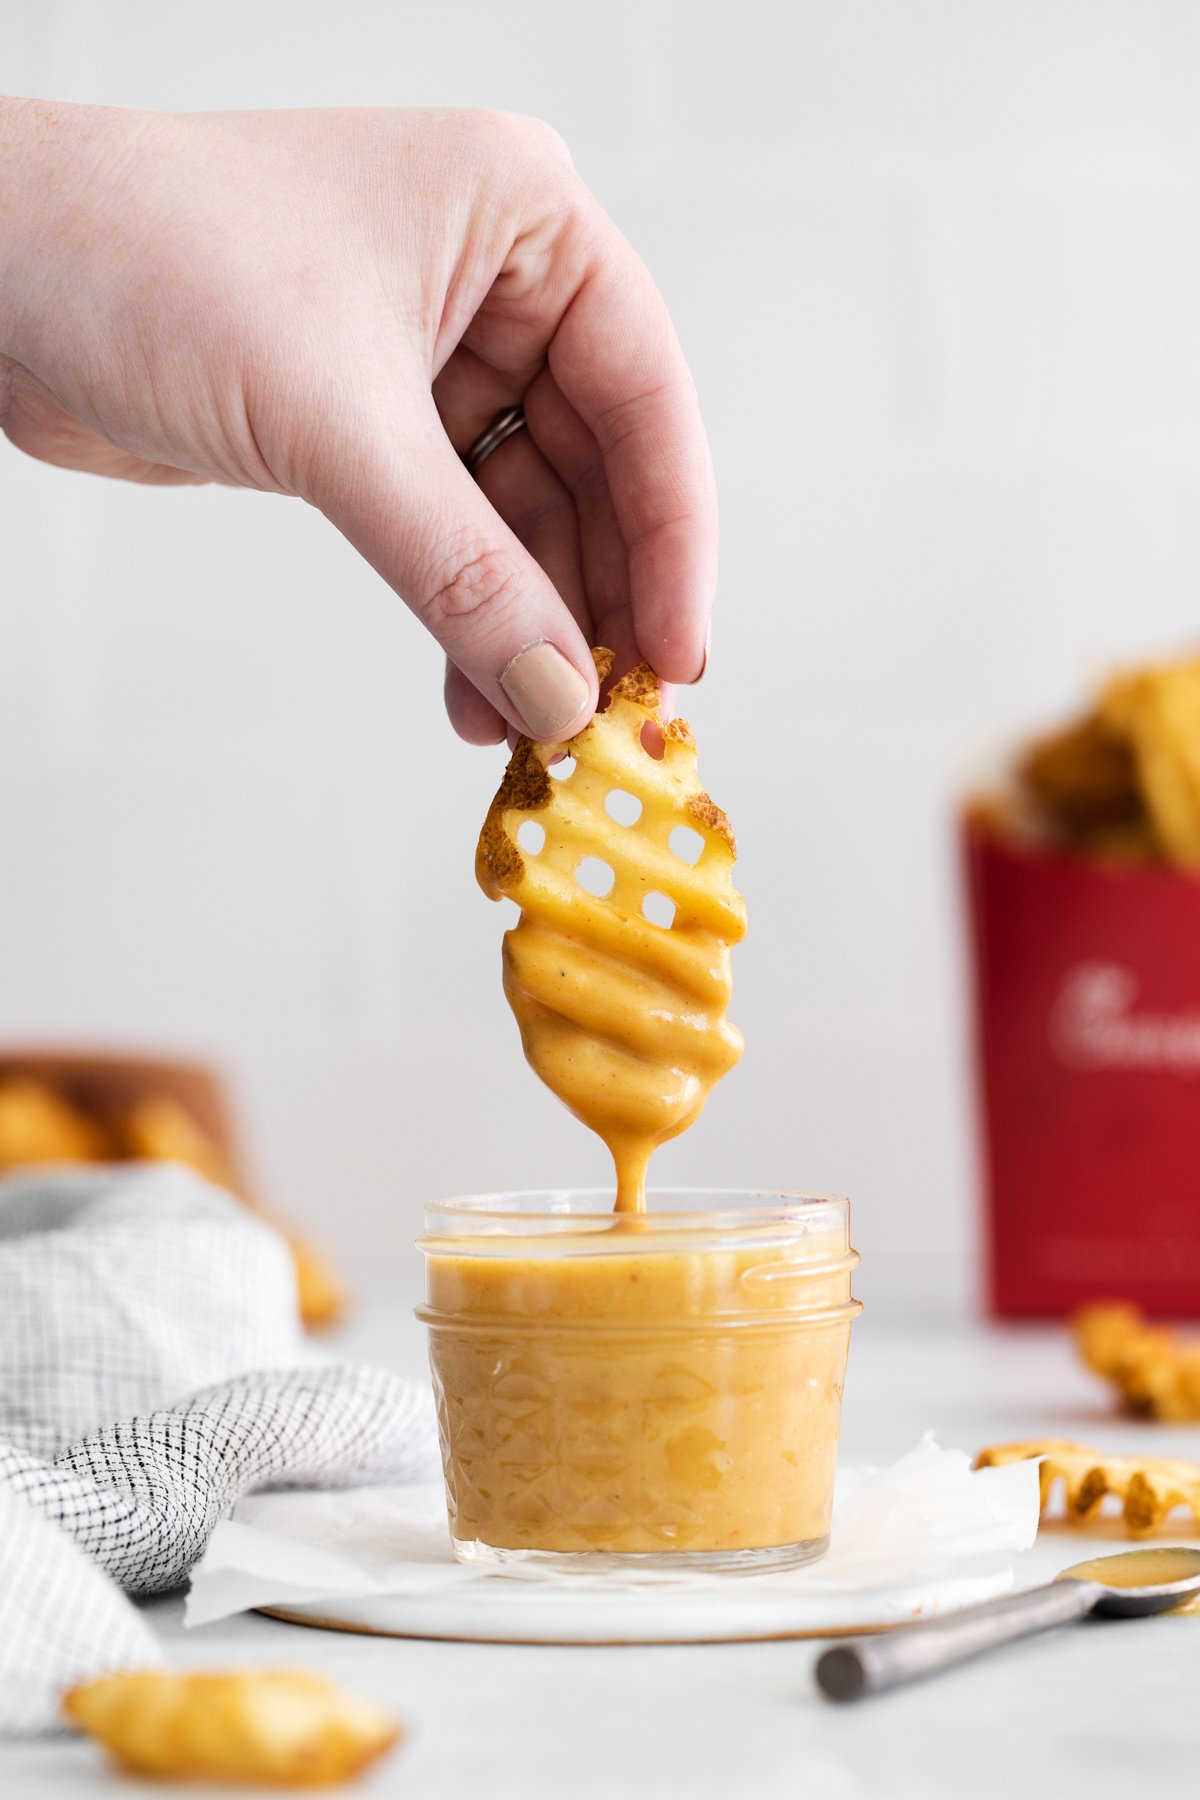 side view of a hand lifting a dipped waffle fry from a glass jar full of chick fil a sauce on a white napkin.